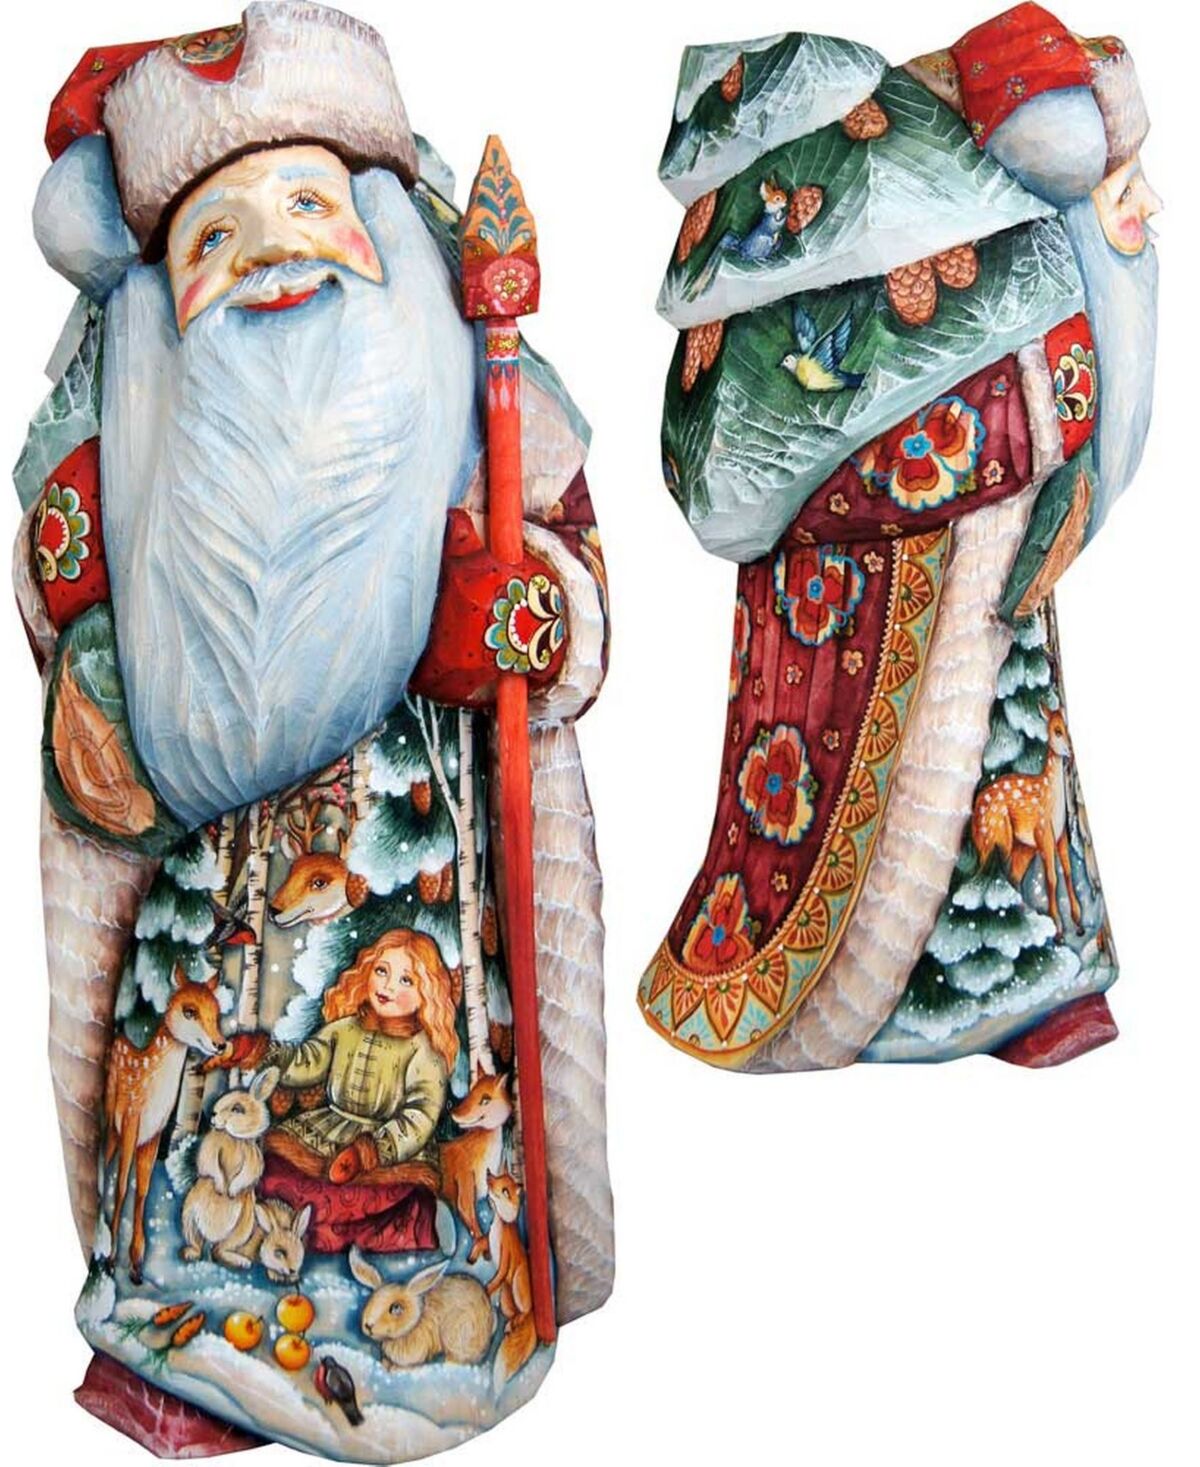 G.DeBrekht Woodcarved and Hand Painted Winter Ballad Hand Painted Santa Claus Figurine - Multi